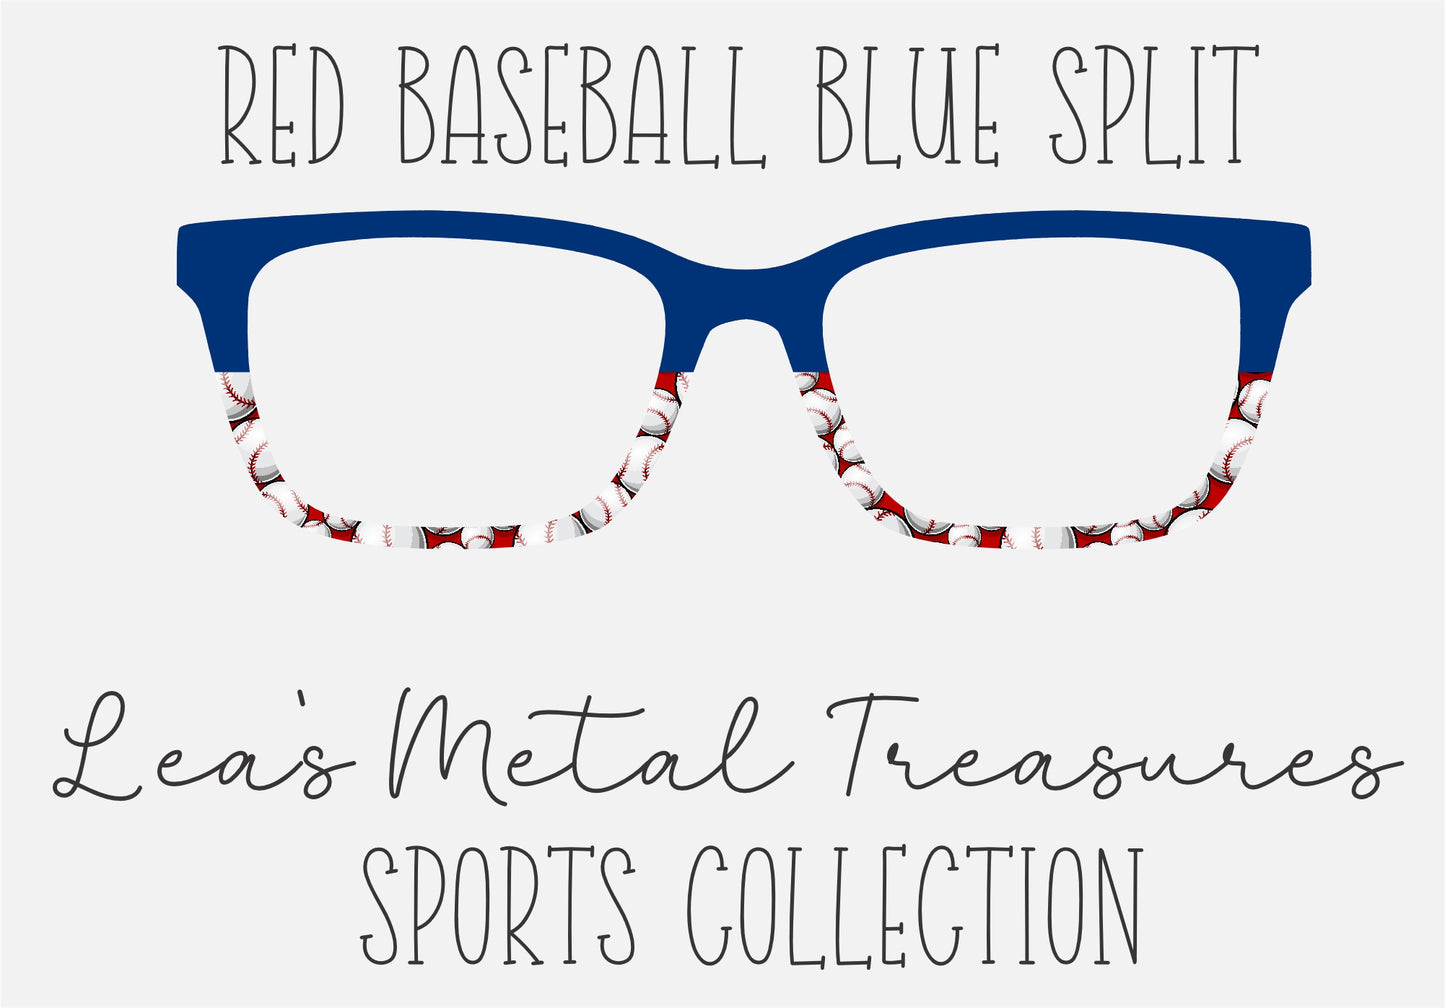 Red Baseball blue split - Texas Rangers - blue 003278 Eyewear Frame Toppers COMES WITH MAGNETS